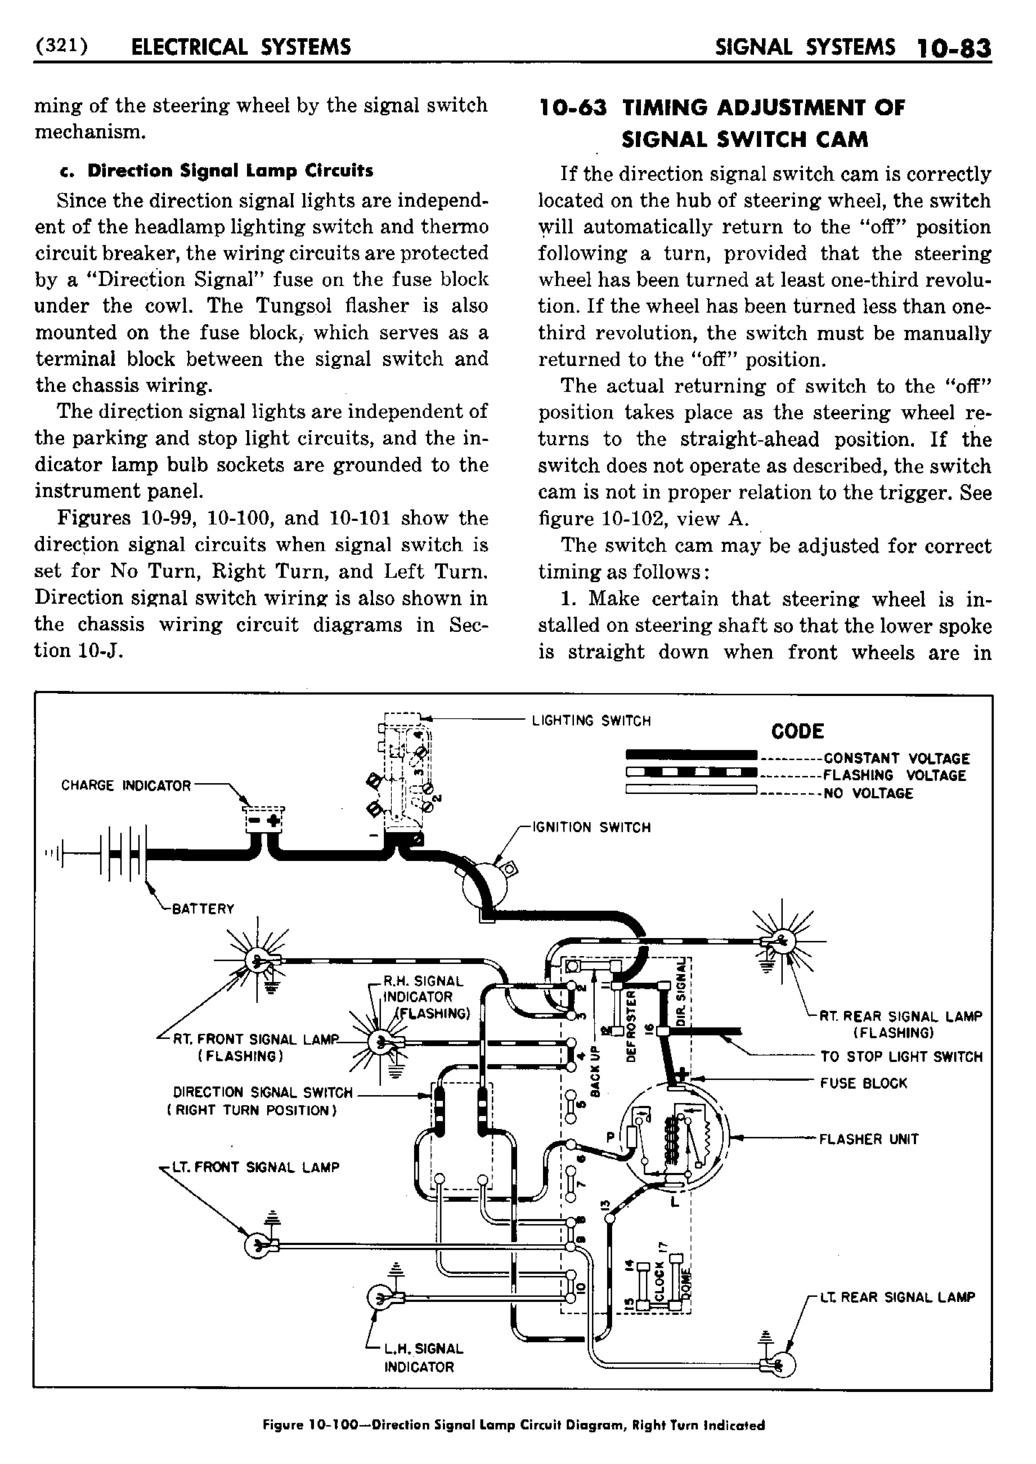 n_11 1950 Buick Shop Manual - Electrical Systems-083-083.jpg